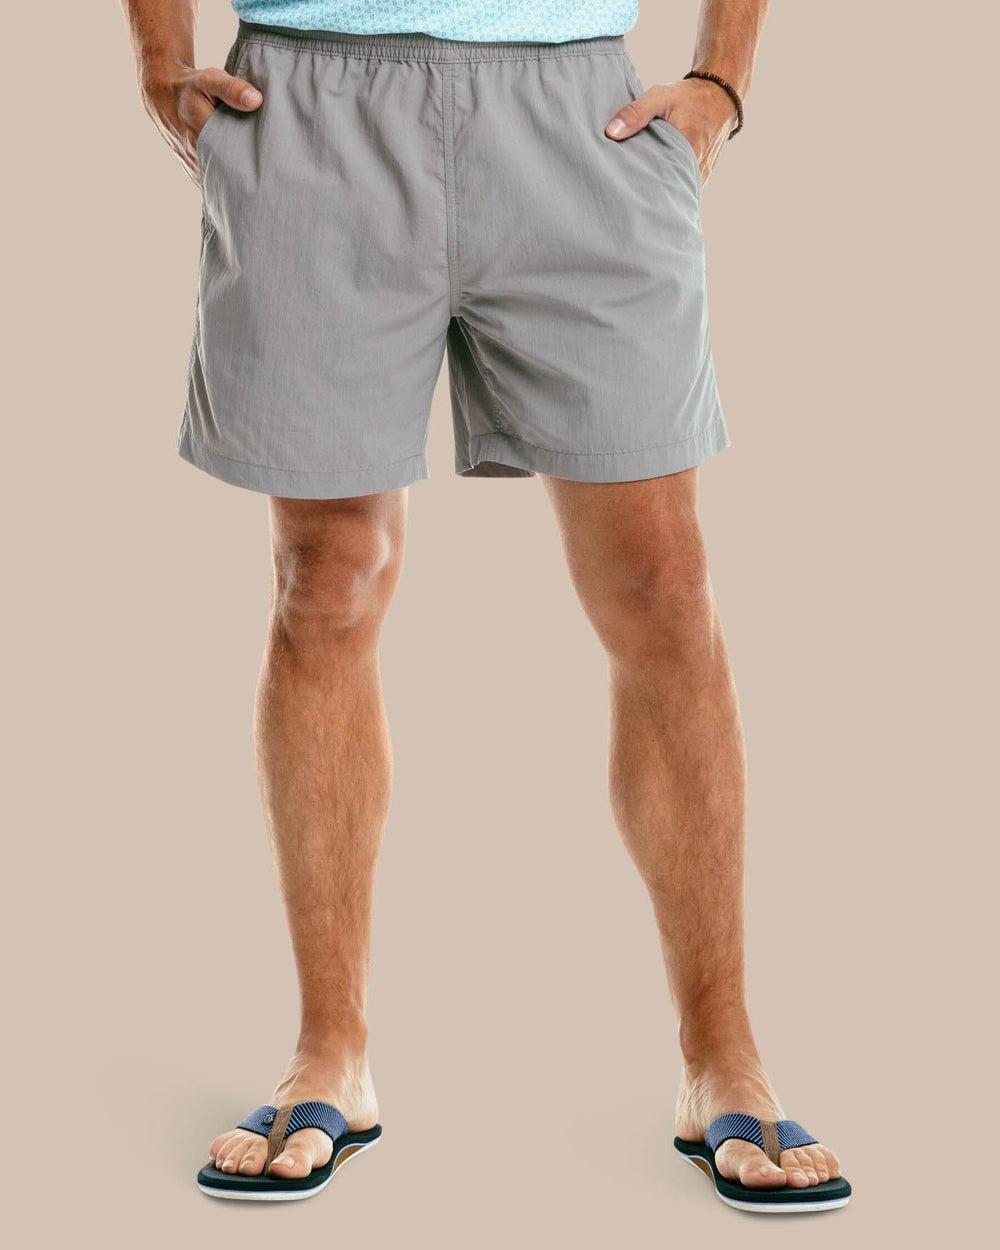 The model front view of the Men's Shoreline 6 Inch Short by Southern Tide  - Frost Grey